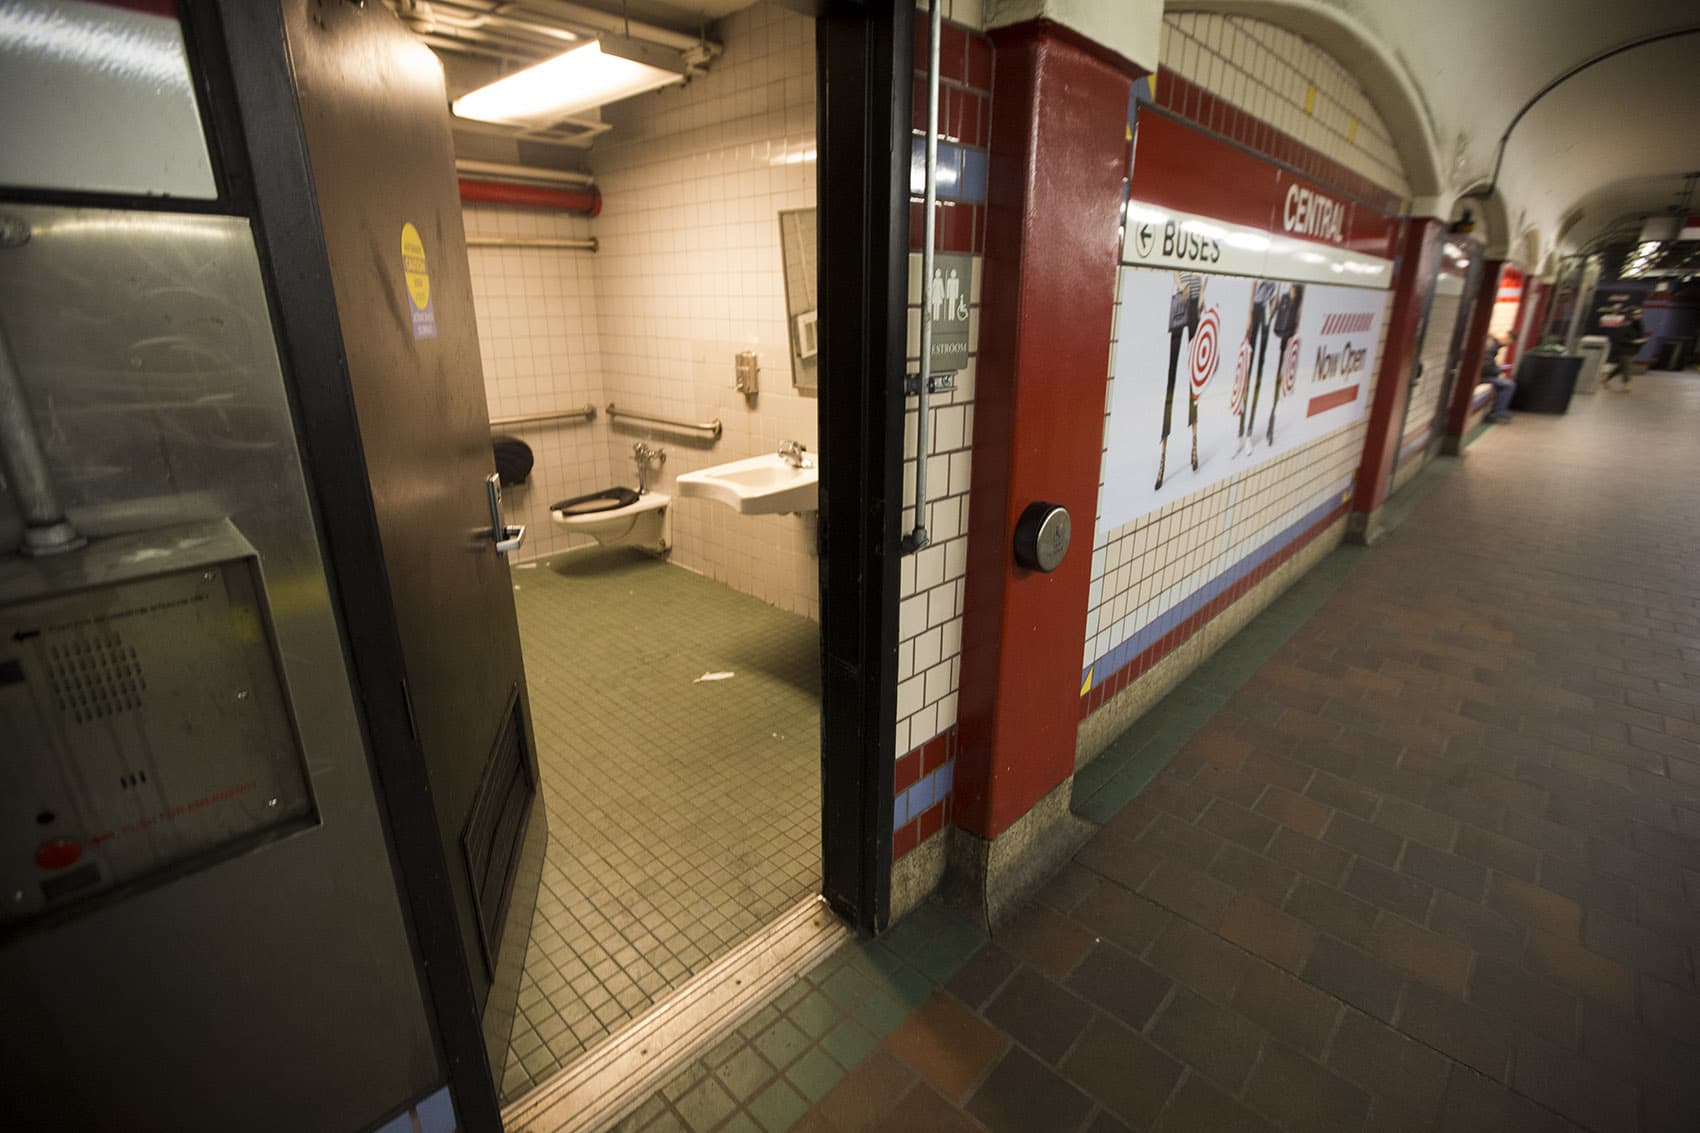 A public restroom on the platform of the Central Square MBTA station which drug users have used in the past. (Jesse Costa/WBUR)